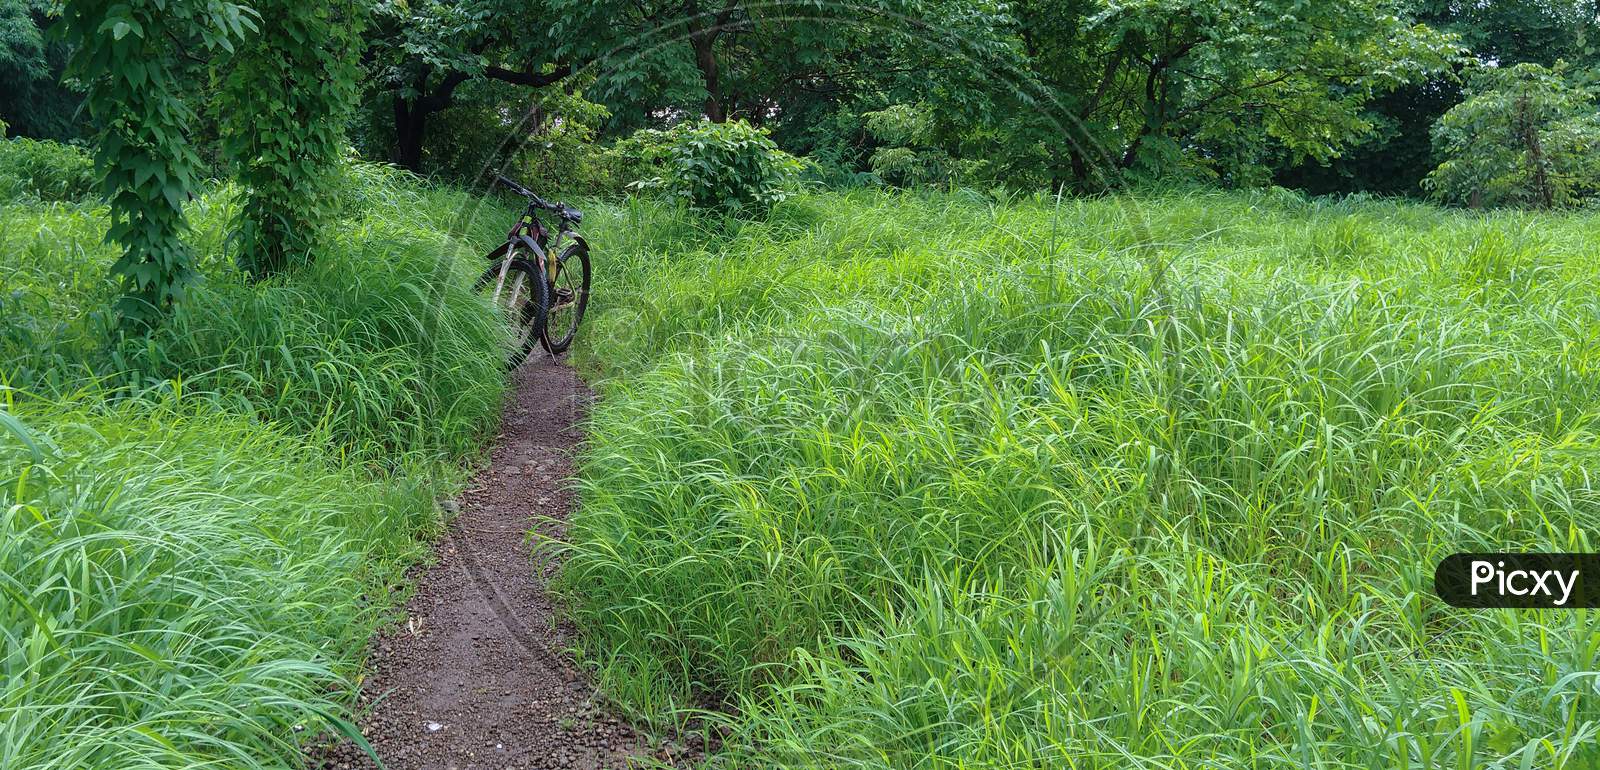 Mtb Bicycle On A Mud Trail Along Green Grass And Trees In Monsoon. Cycle In Nature. Landscape Image Of Cycle,Green Grass And Trees. Country Side Bike Ride.